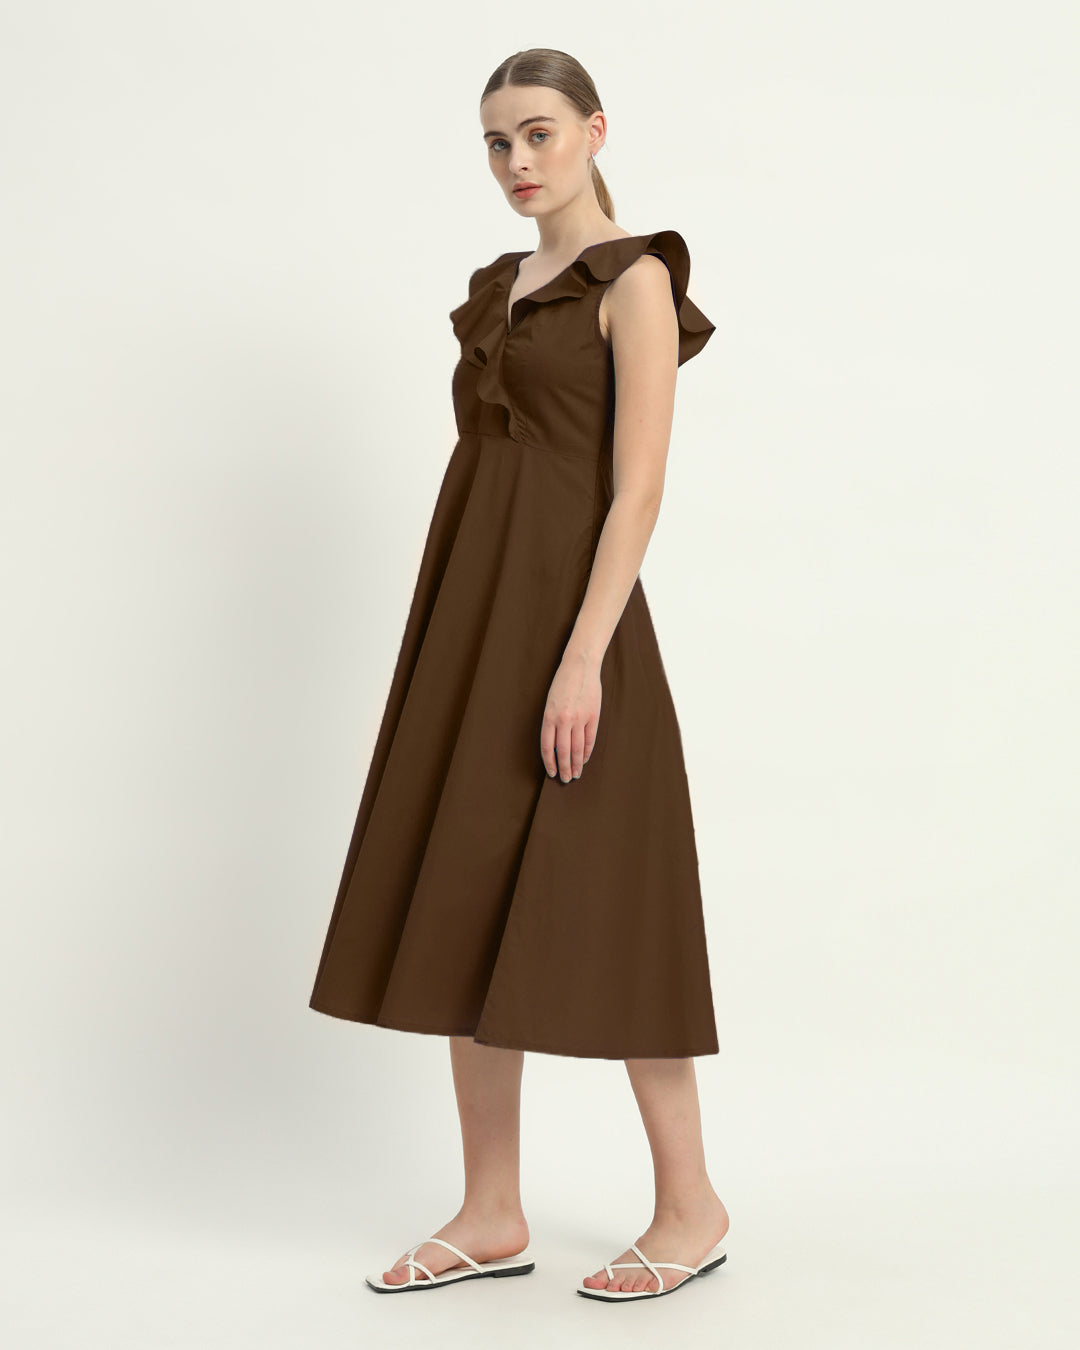 The Albany Nutshell Cotton Dress